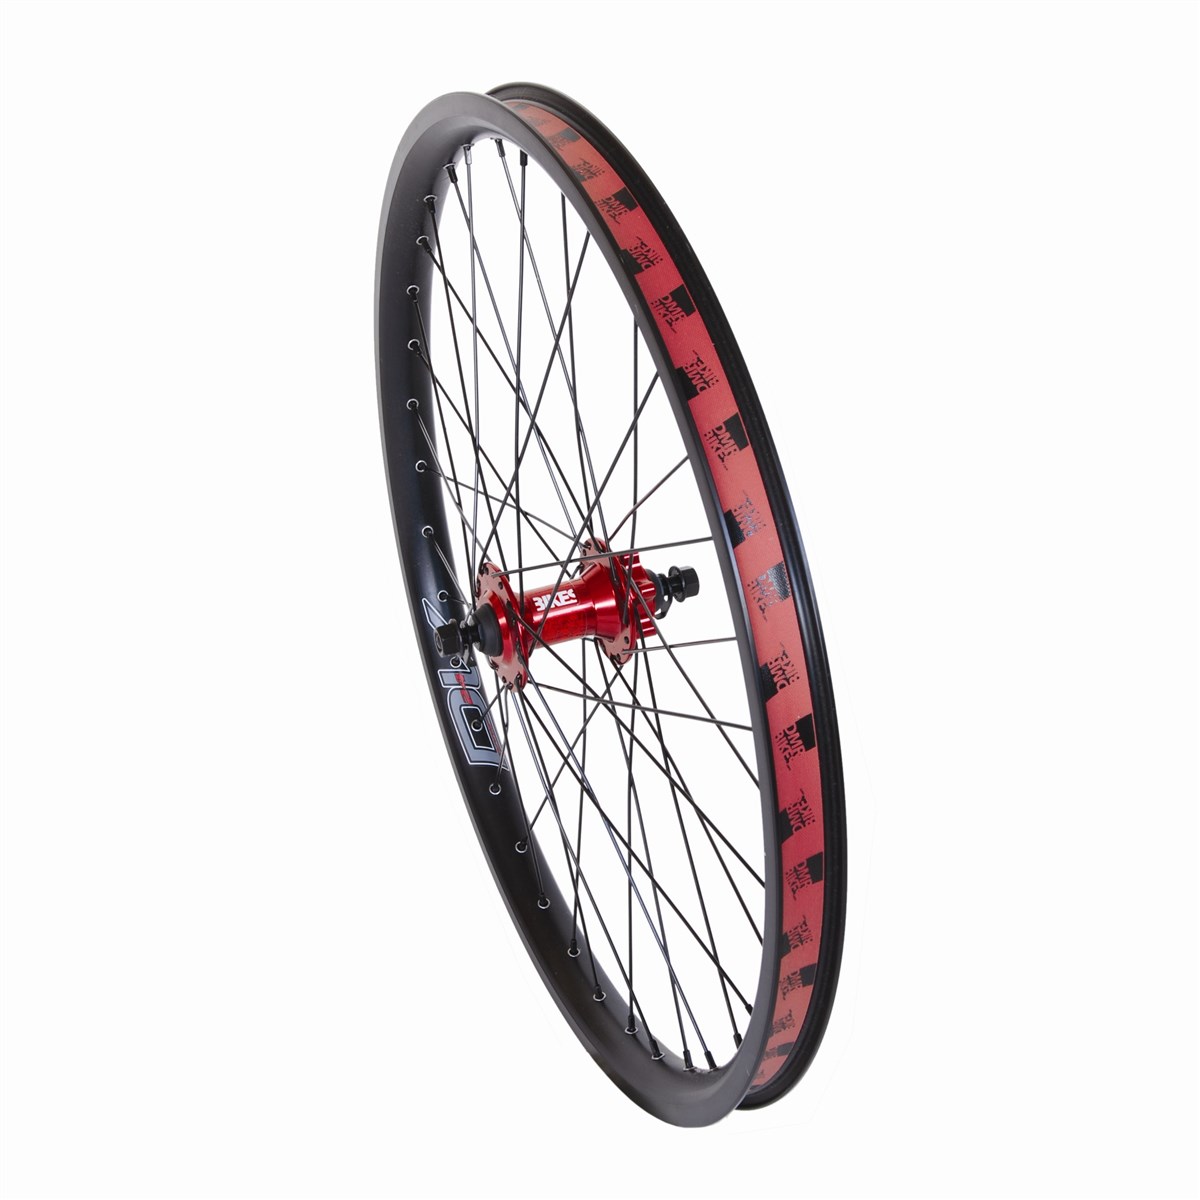 DMR Comp 24 inch Wheels product image